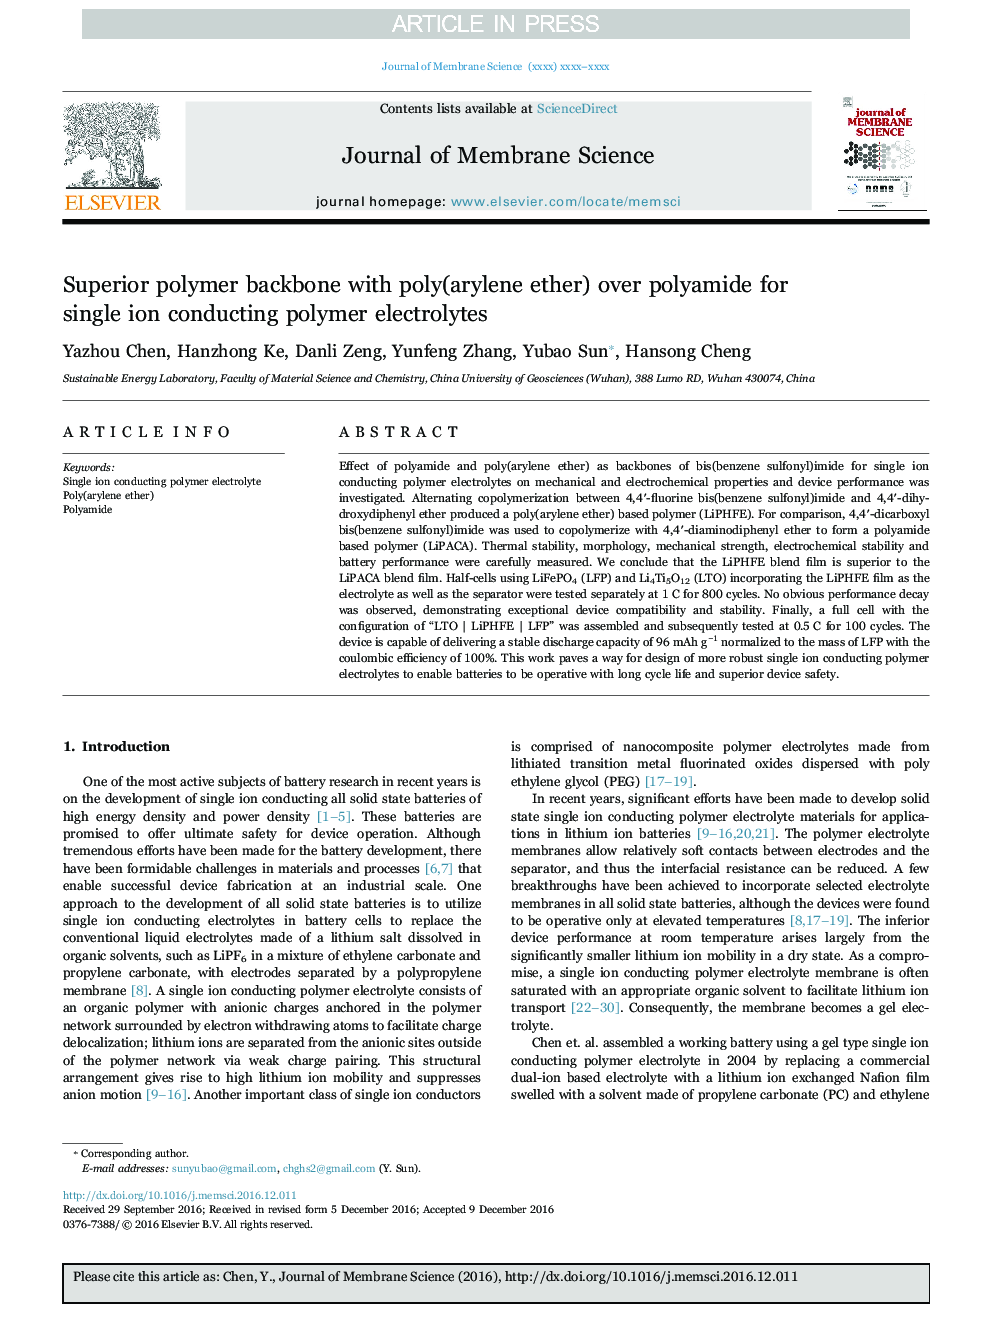 Superior polymer backbone with poly(arylene ether) over polyamide for single ion conducting polymer electrolytes